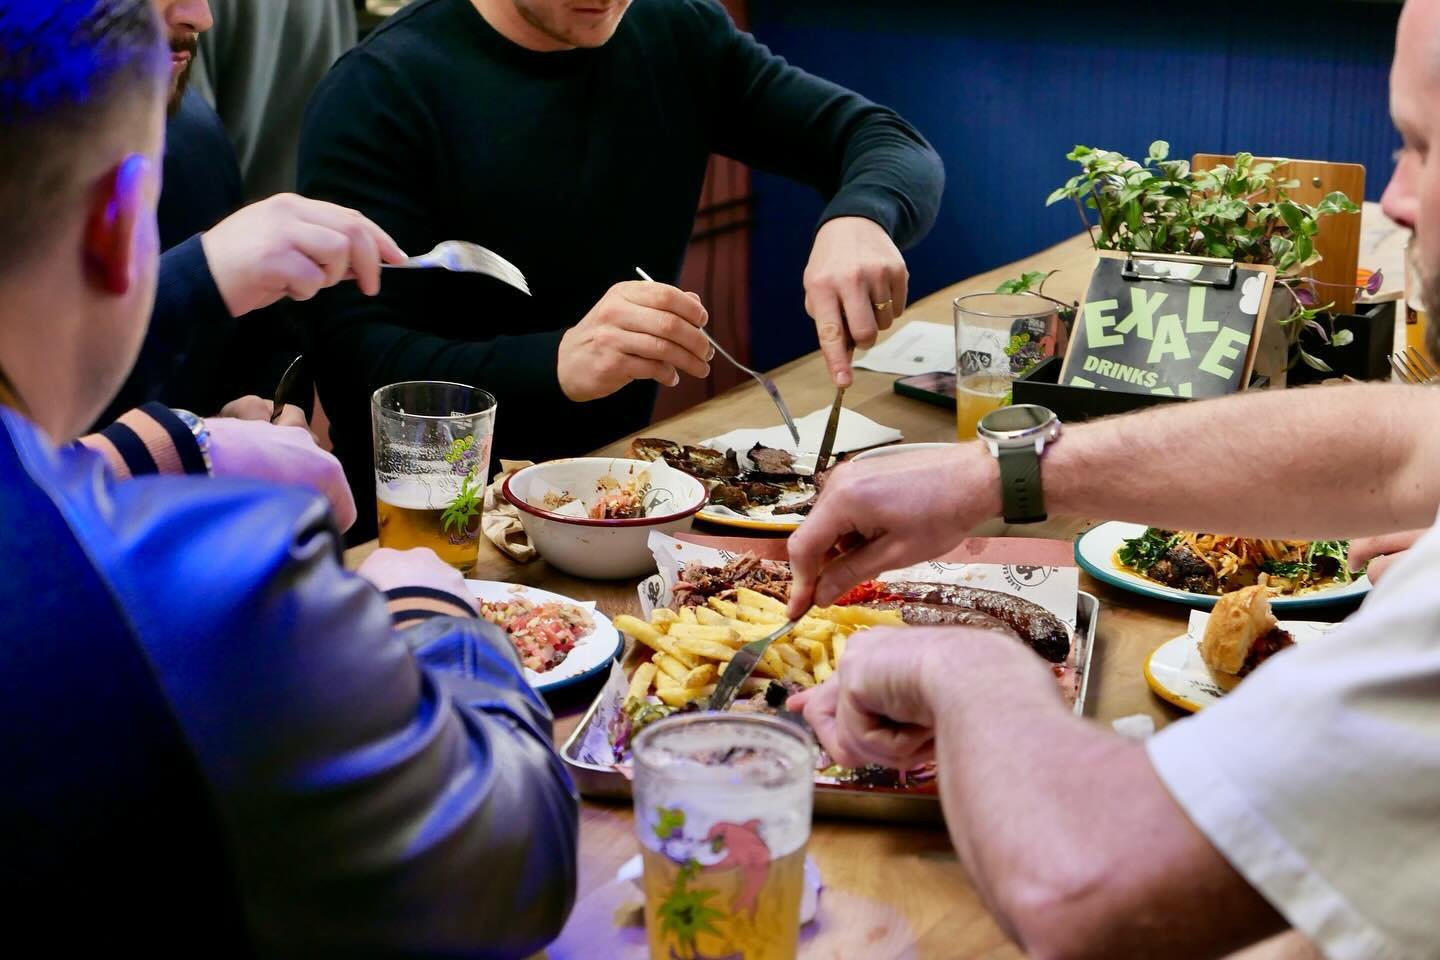 DIG IN 🤺🥩

Its sharing Sunday. Grab your gang and get down here for @black.cactus.bbq Sunday specials from midday